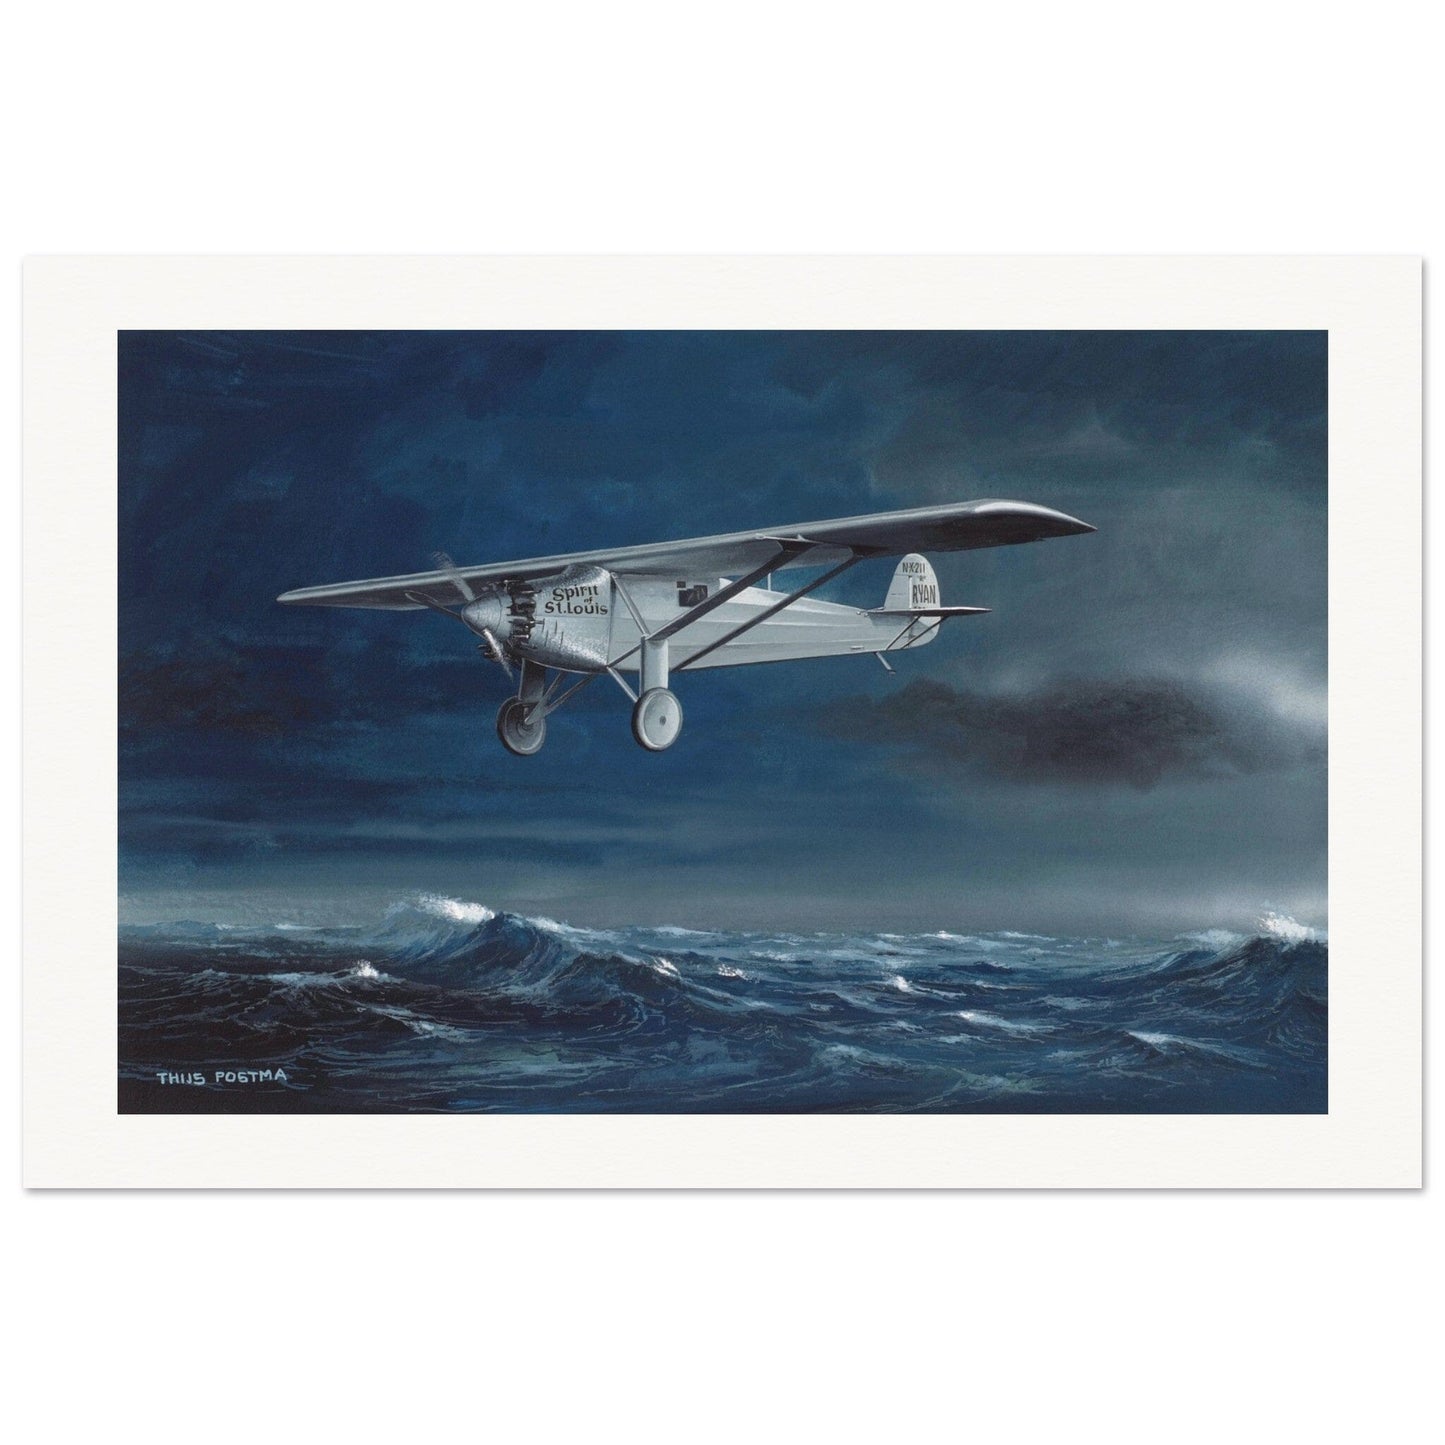 Thijs Postma - Poster - Charles Lindbergh Spirit of St. Louis 1927 Poster Only TP Aviation Art 60x90 cm / 24x36″ 